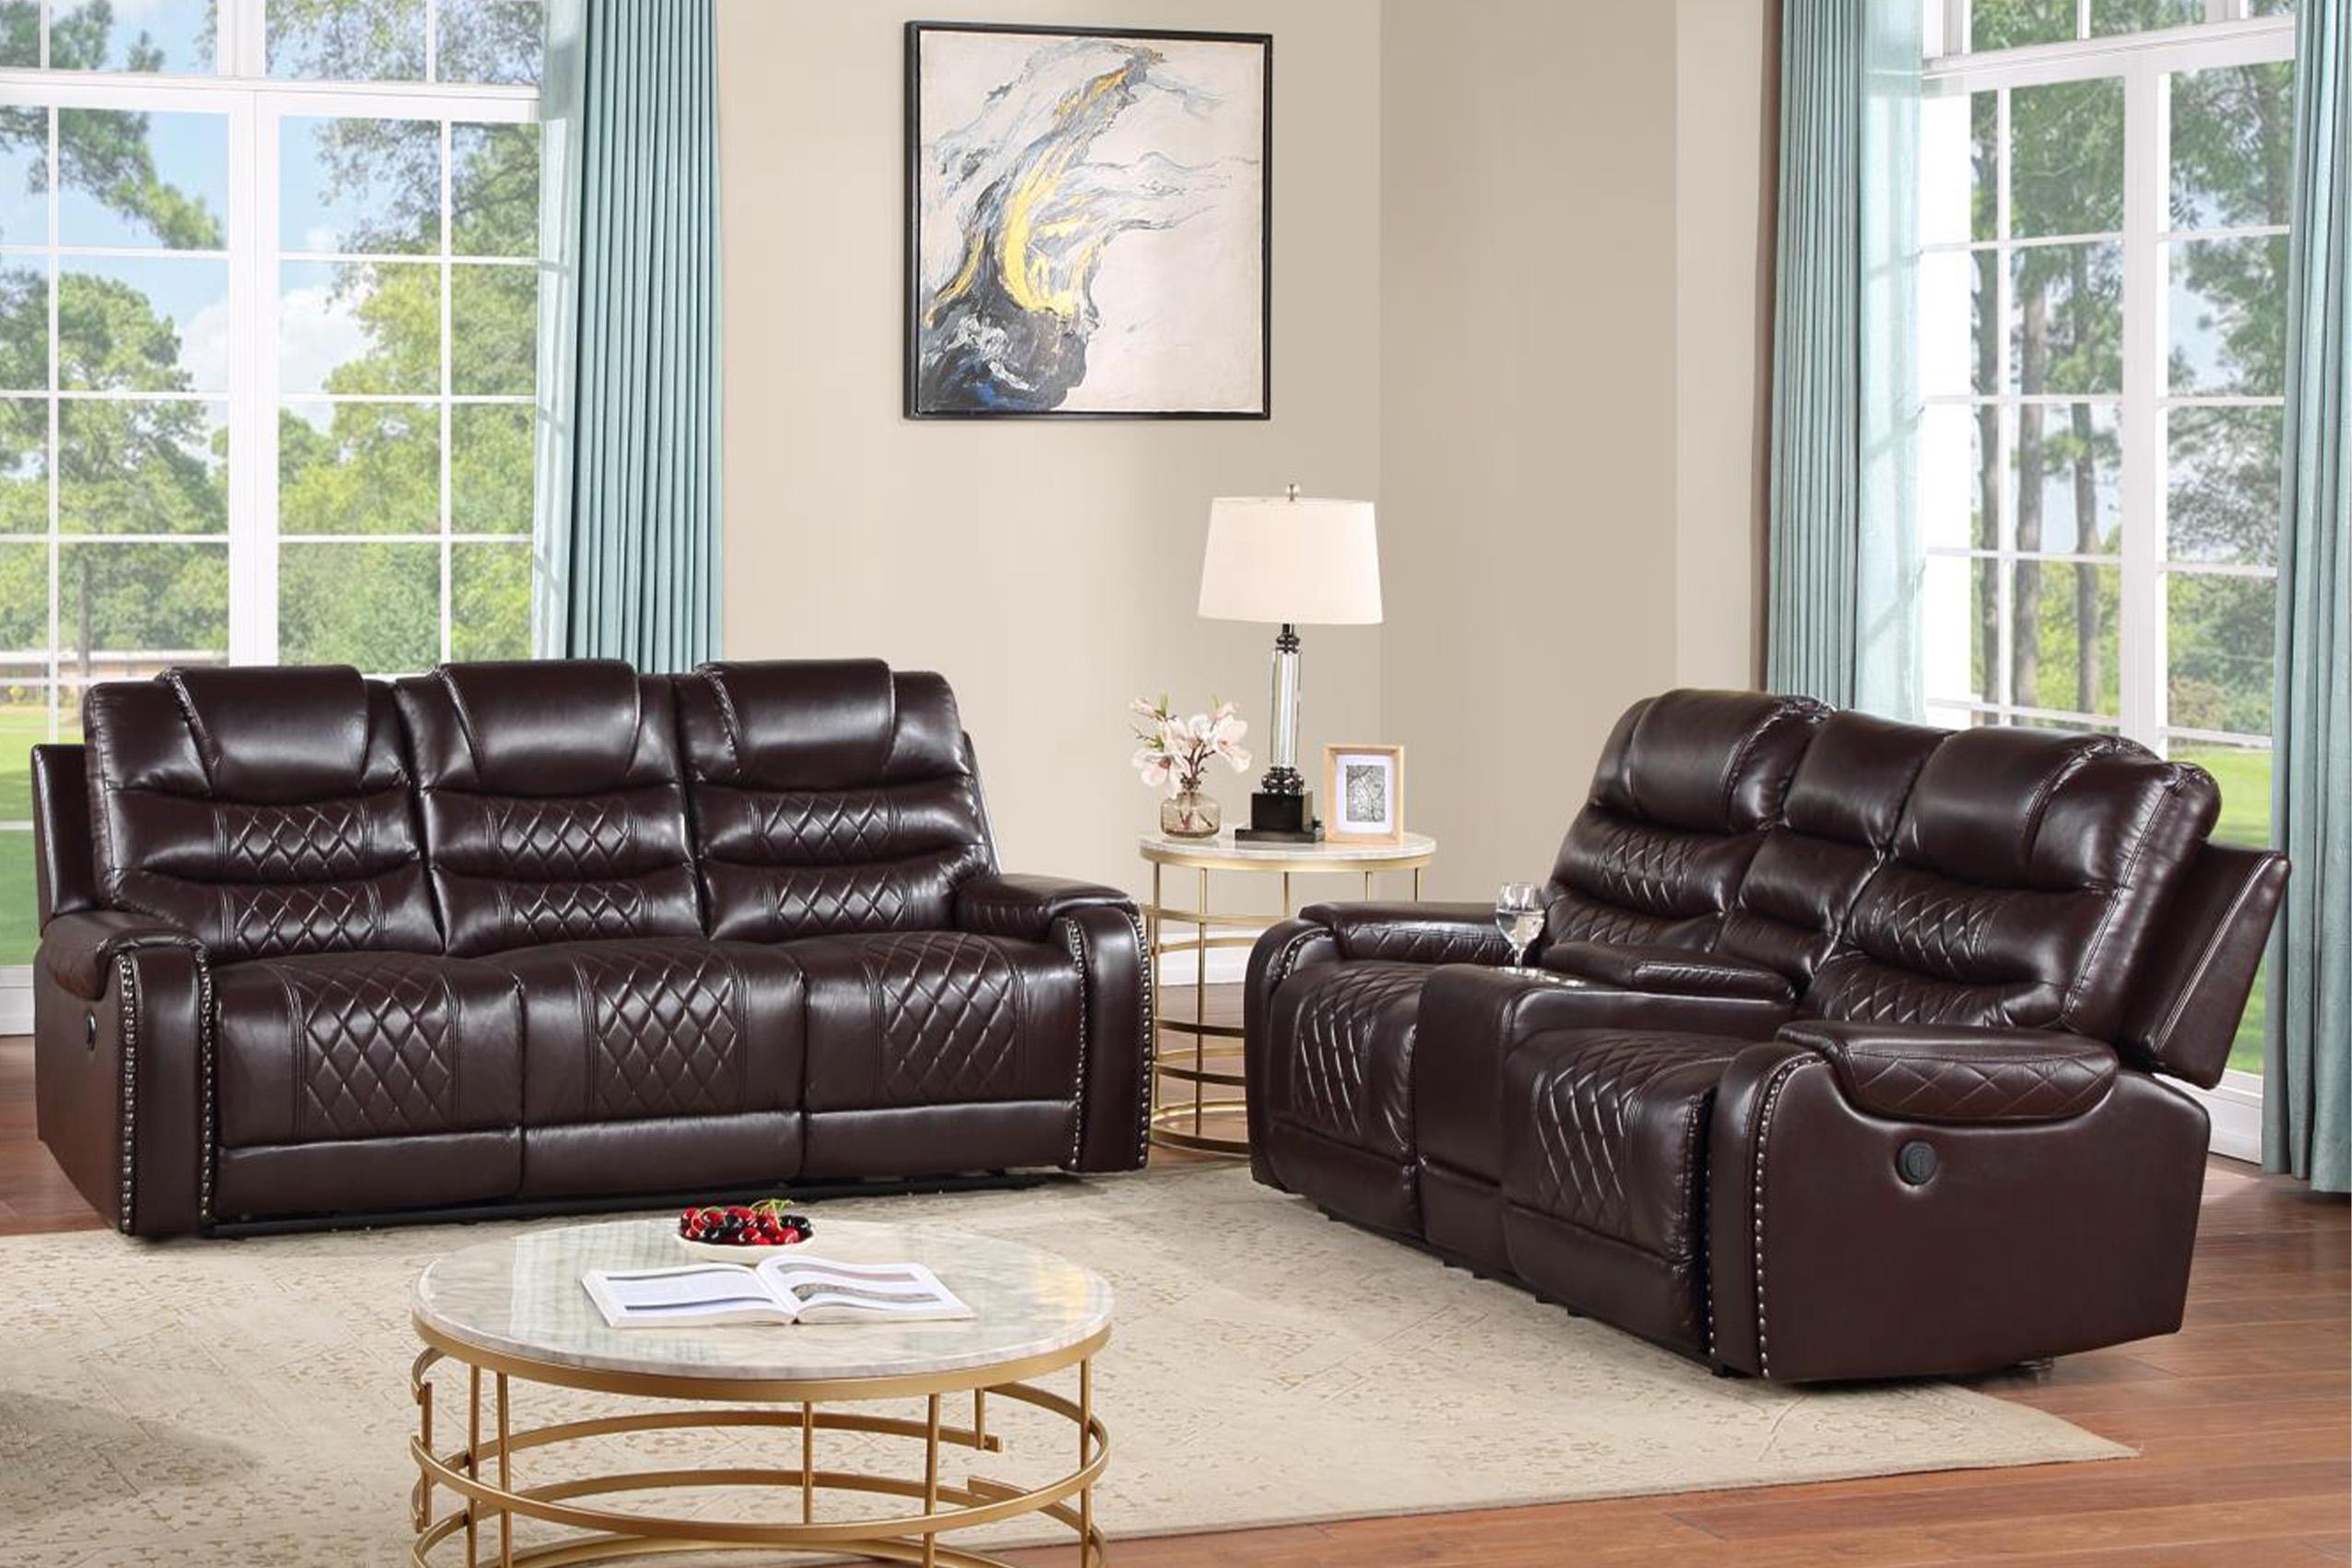 Galaxy Home Furniture TENNESSEE-BR Recliner Sofa Set